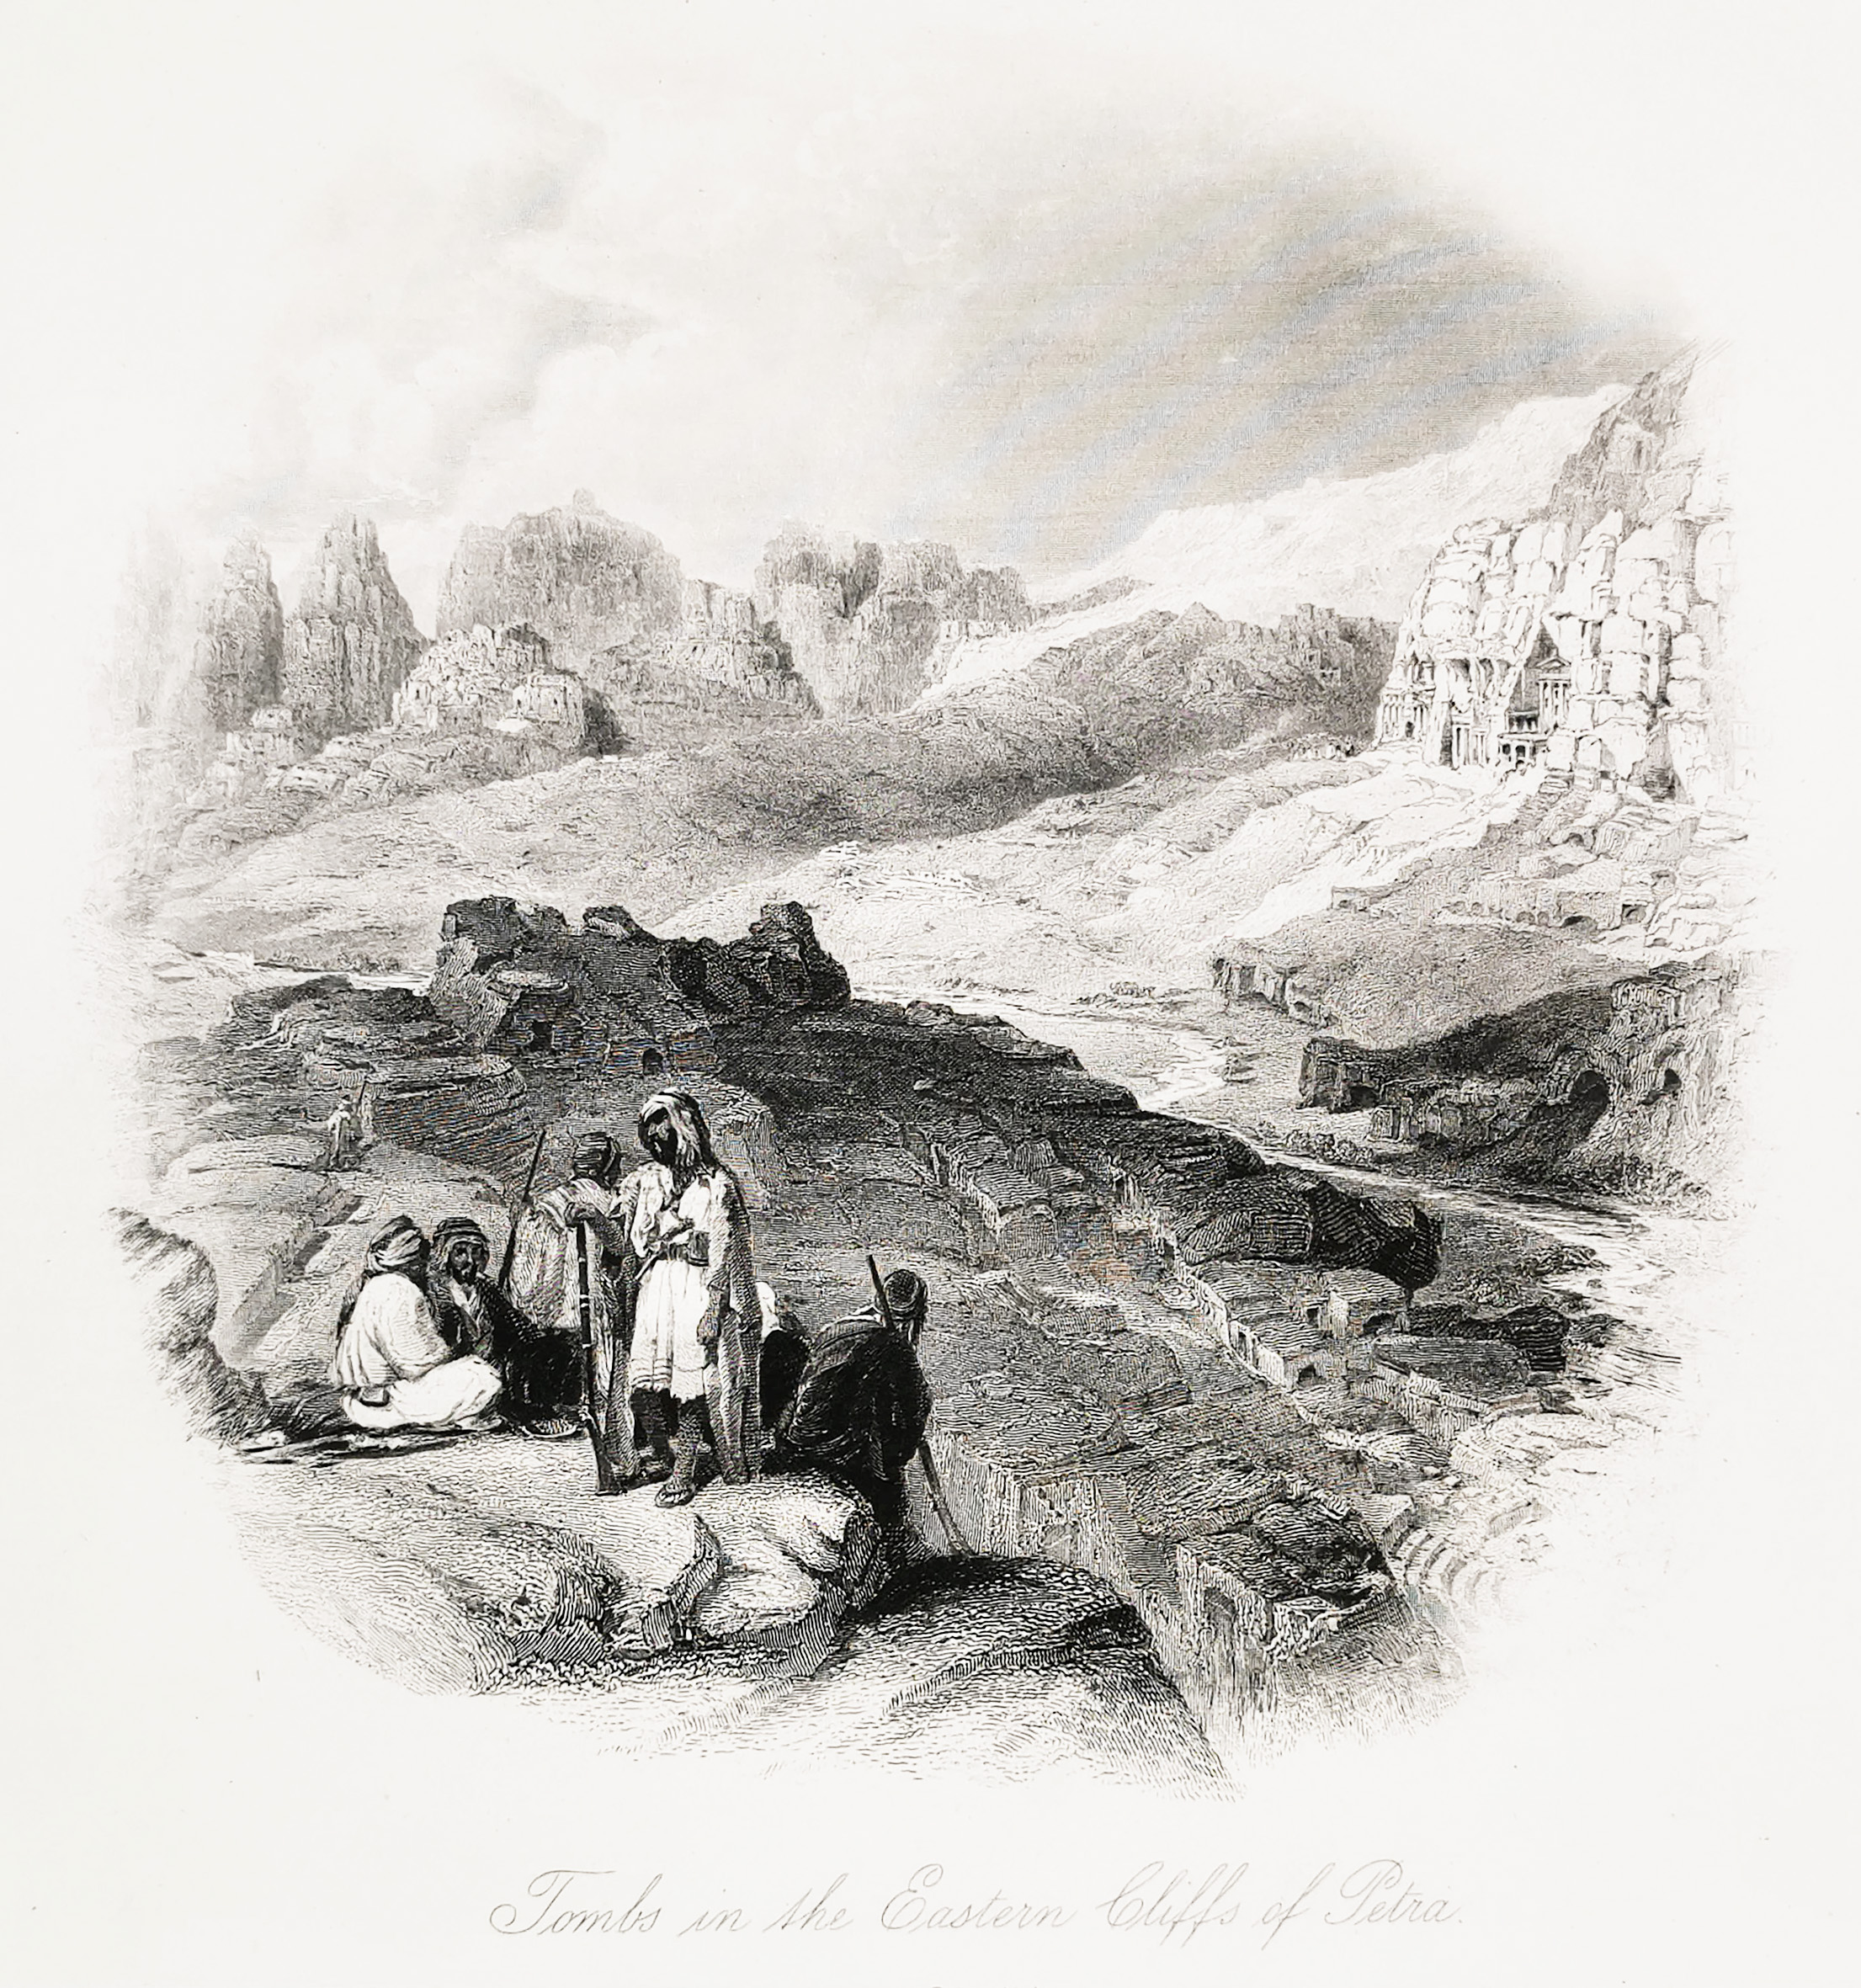 Tombs in the Eastern Cliffs of Petra. - Antique Print from 1881